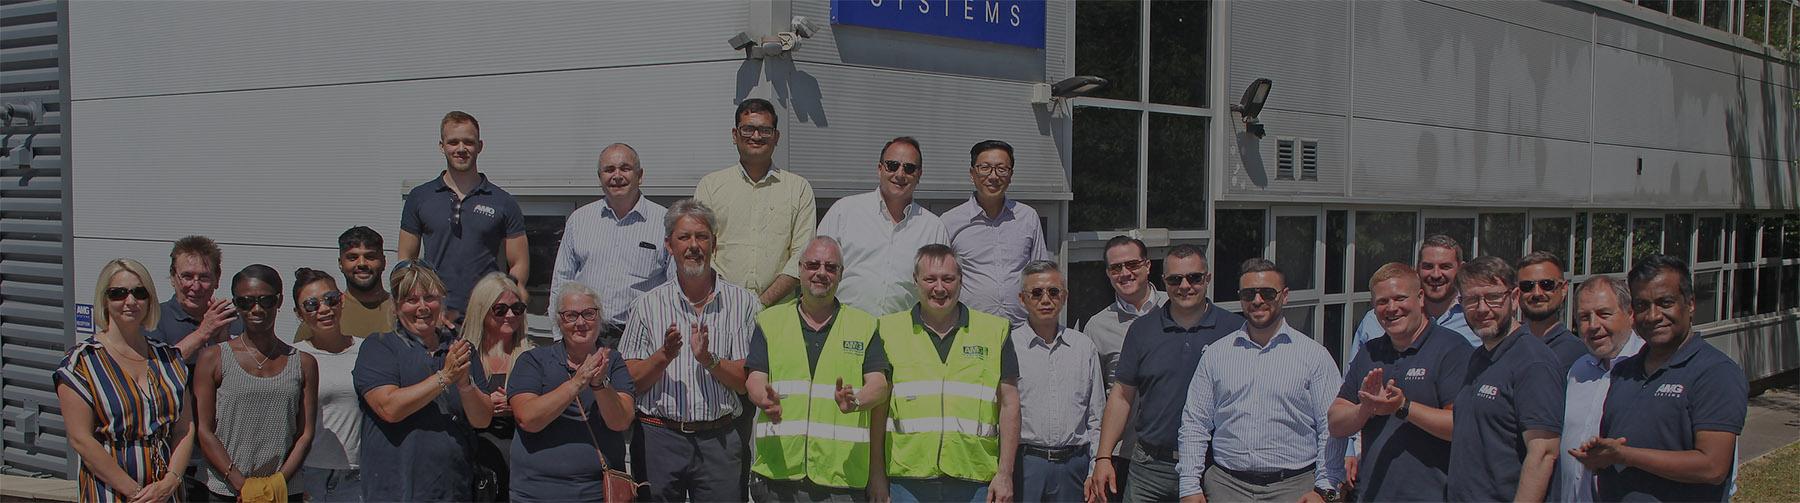 AMG Systems | Industrial Network Transmission Solutions